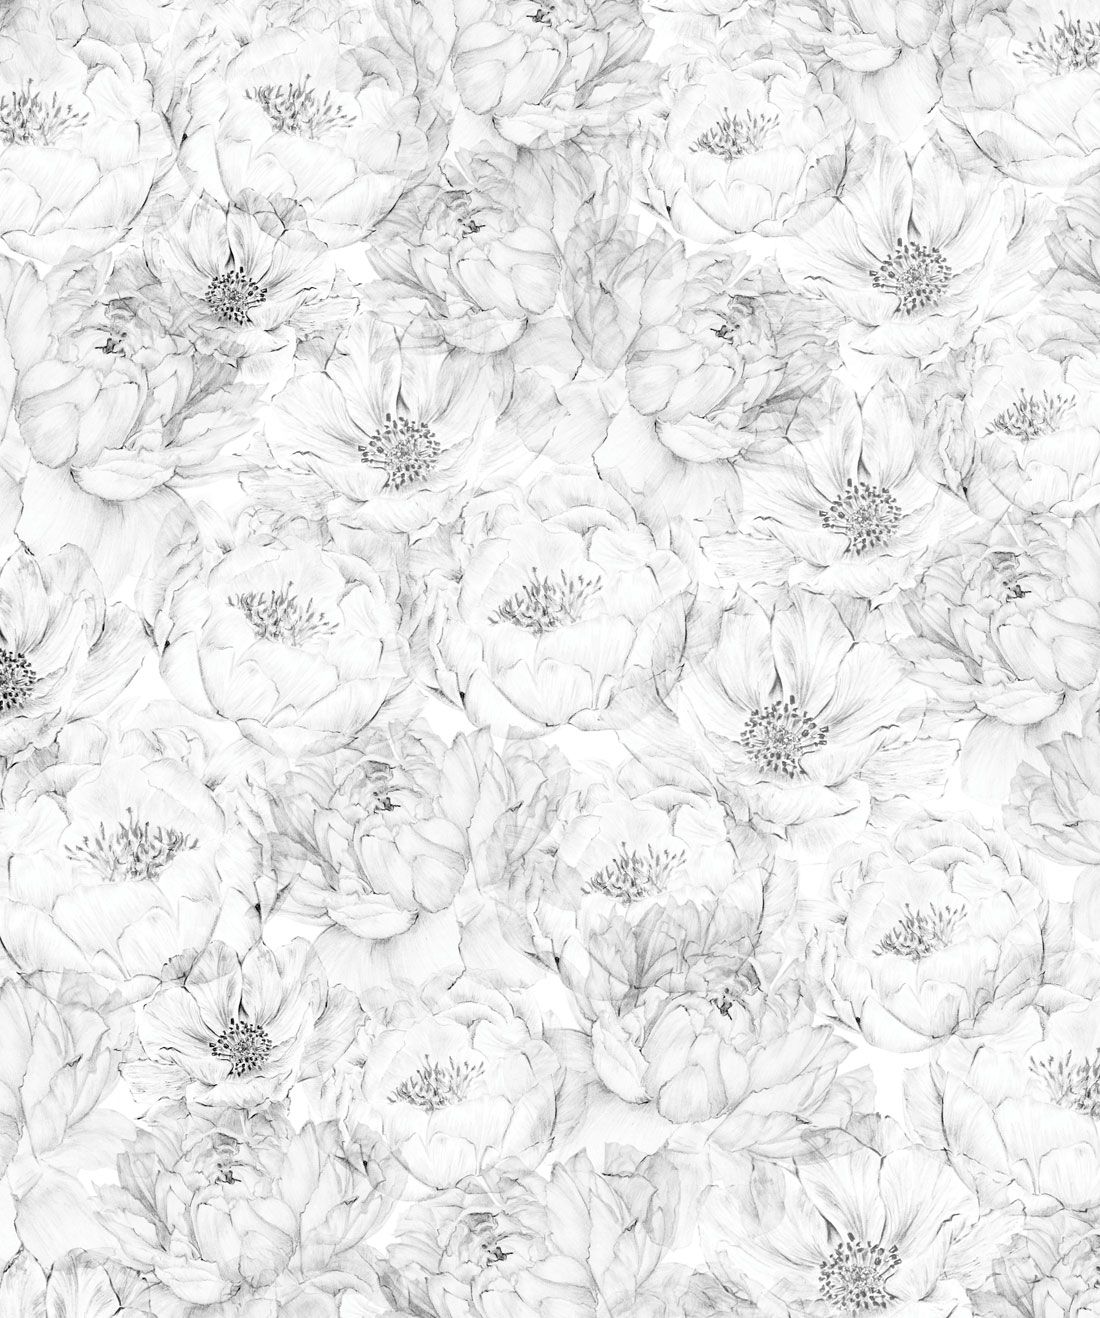 Peonies & Anemones (Large) is a wallpaper for subtle interiors